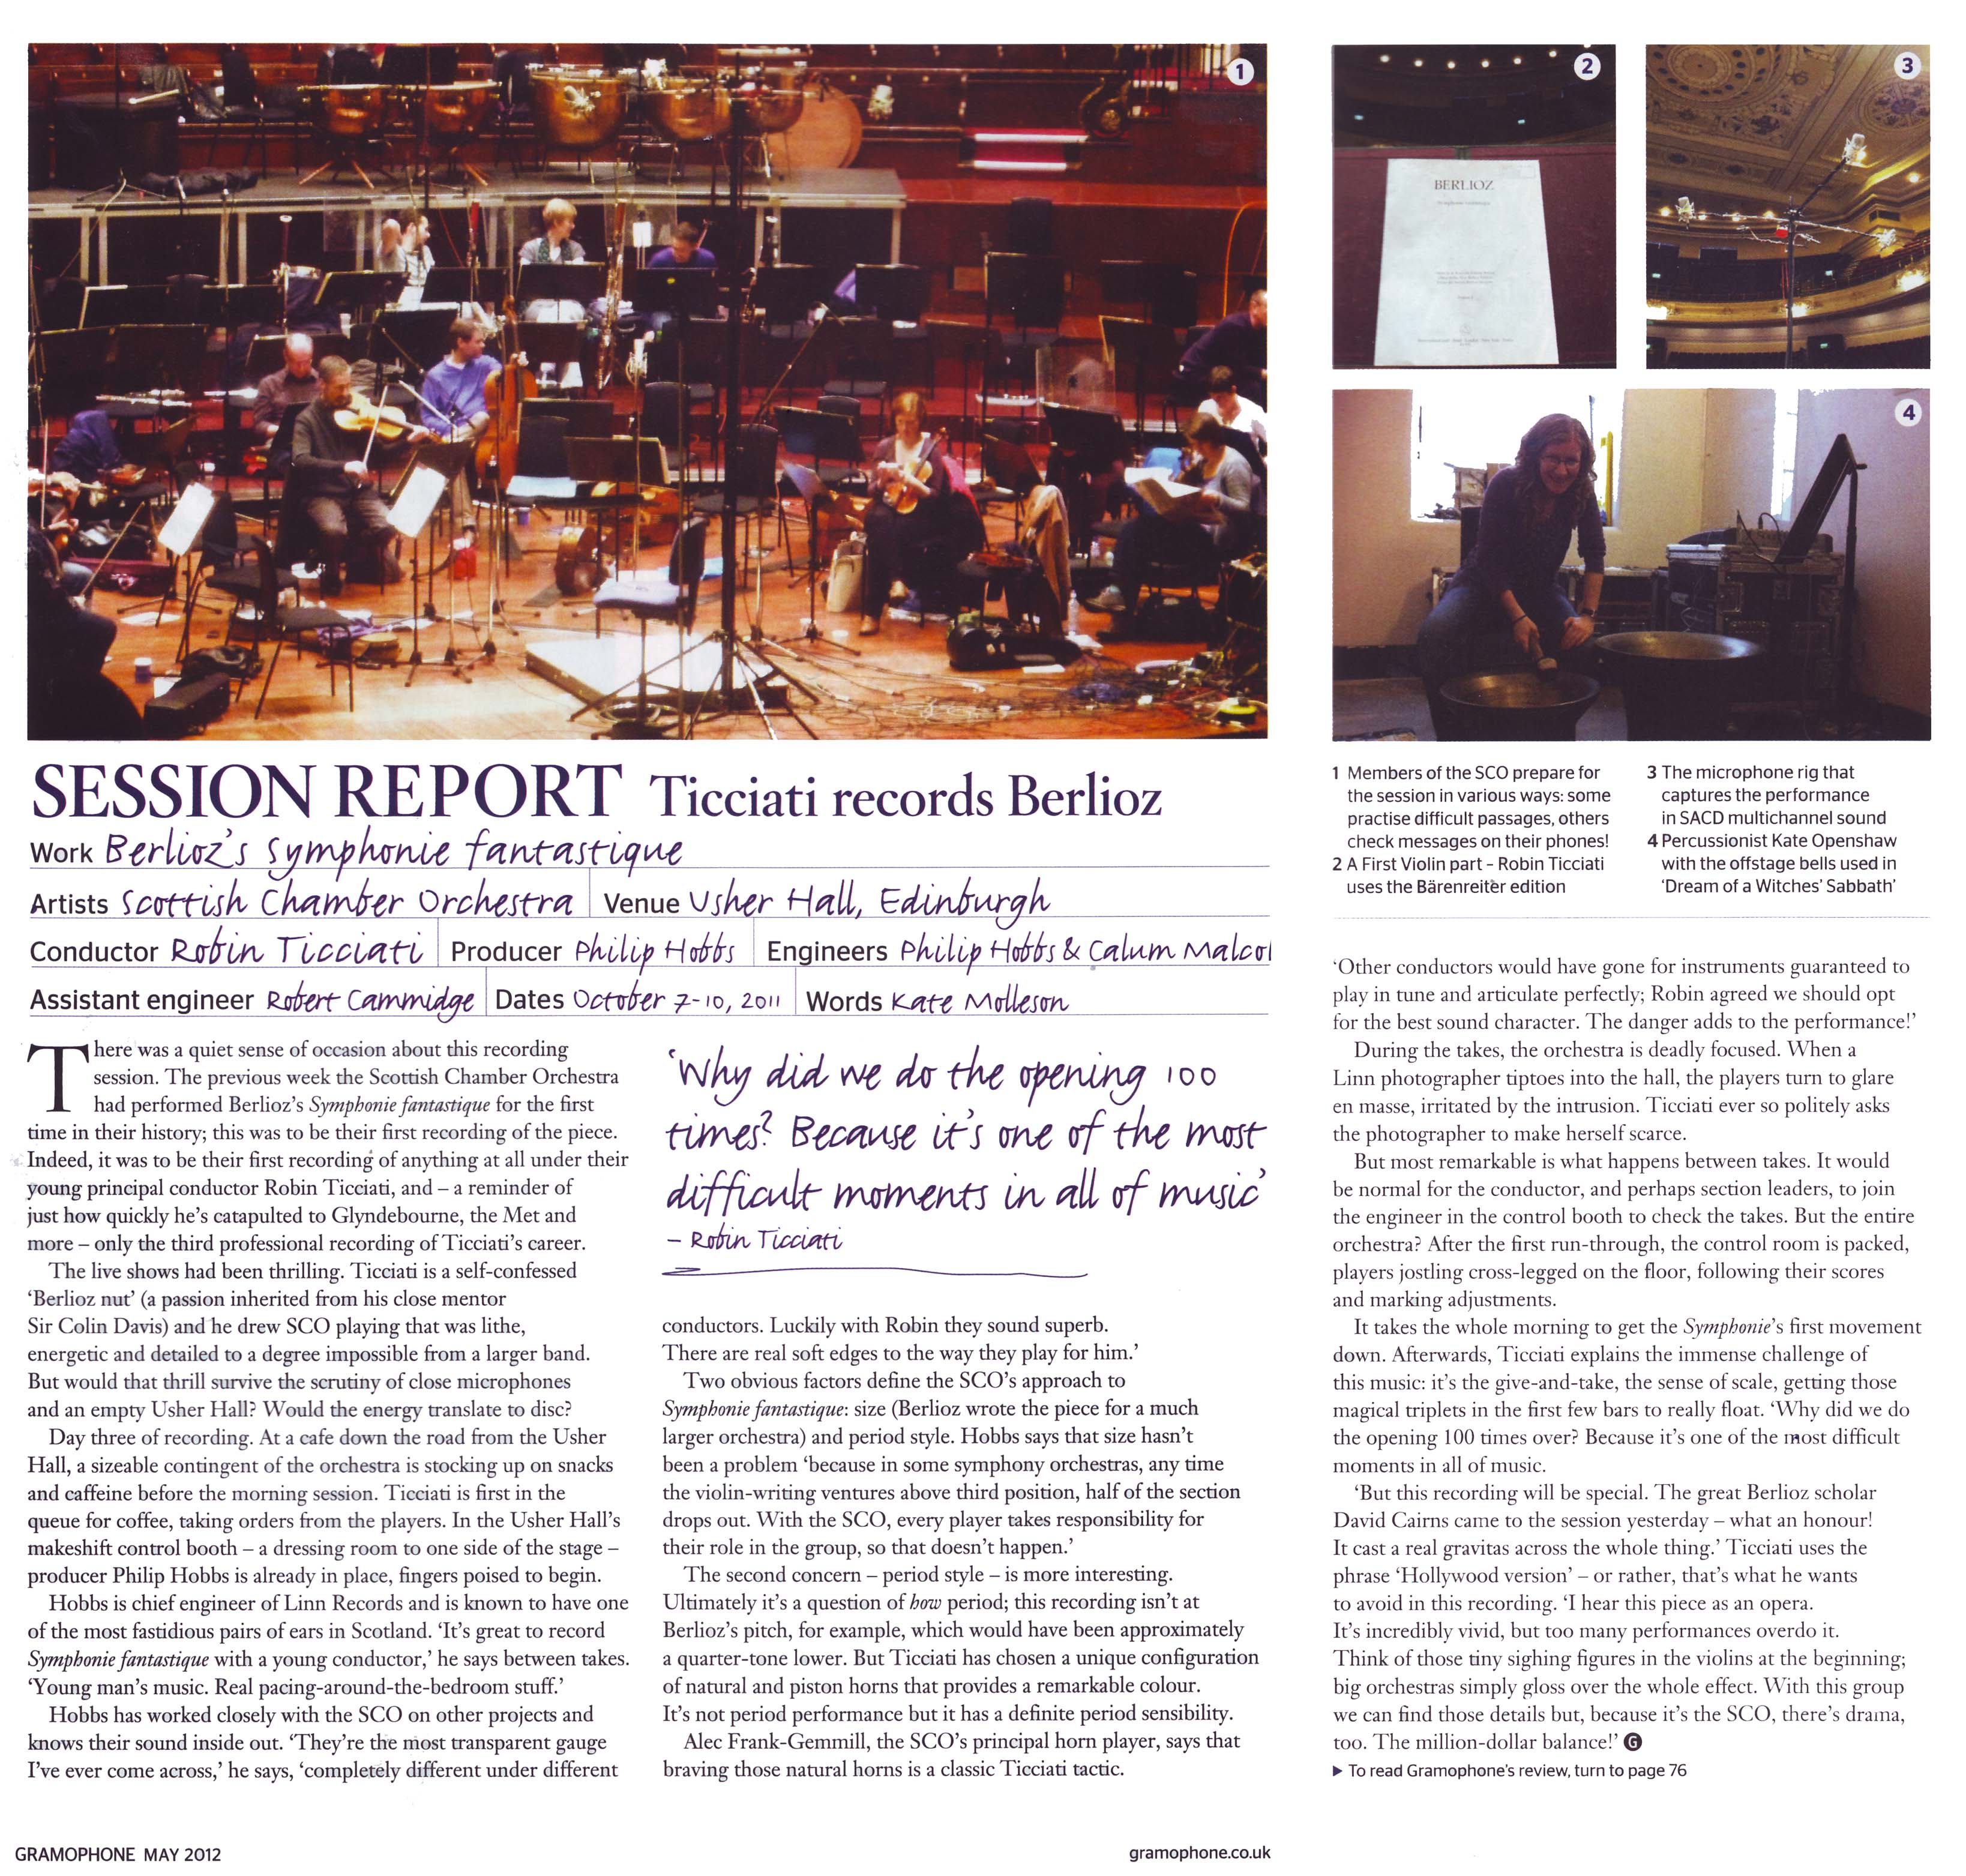 Gramophone May 2012 Session Report